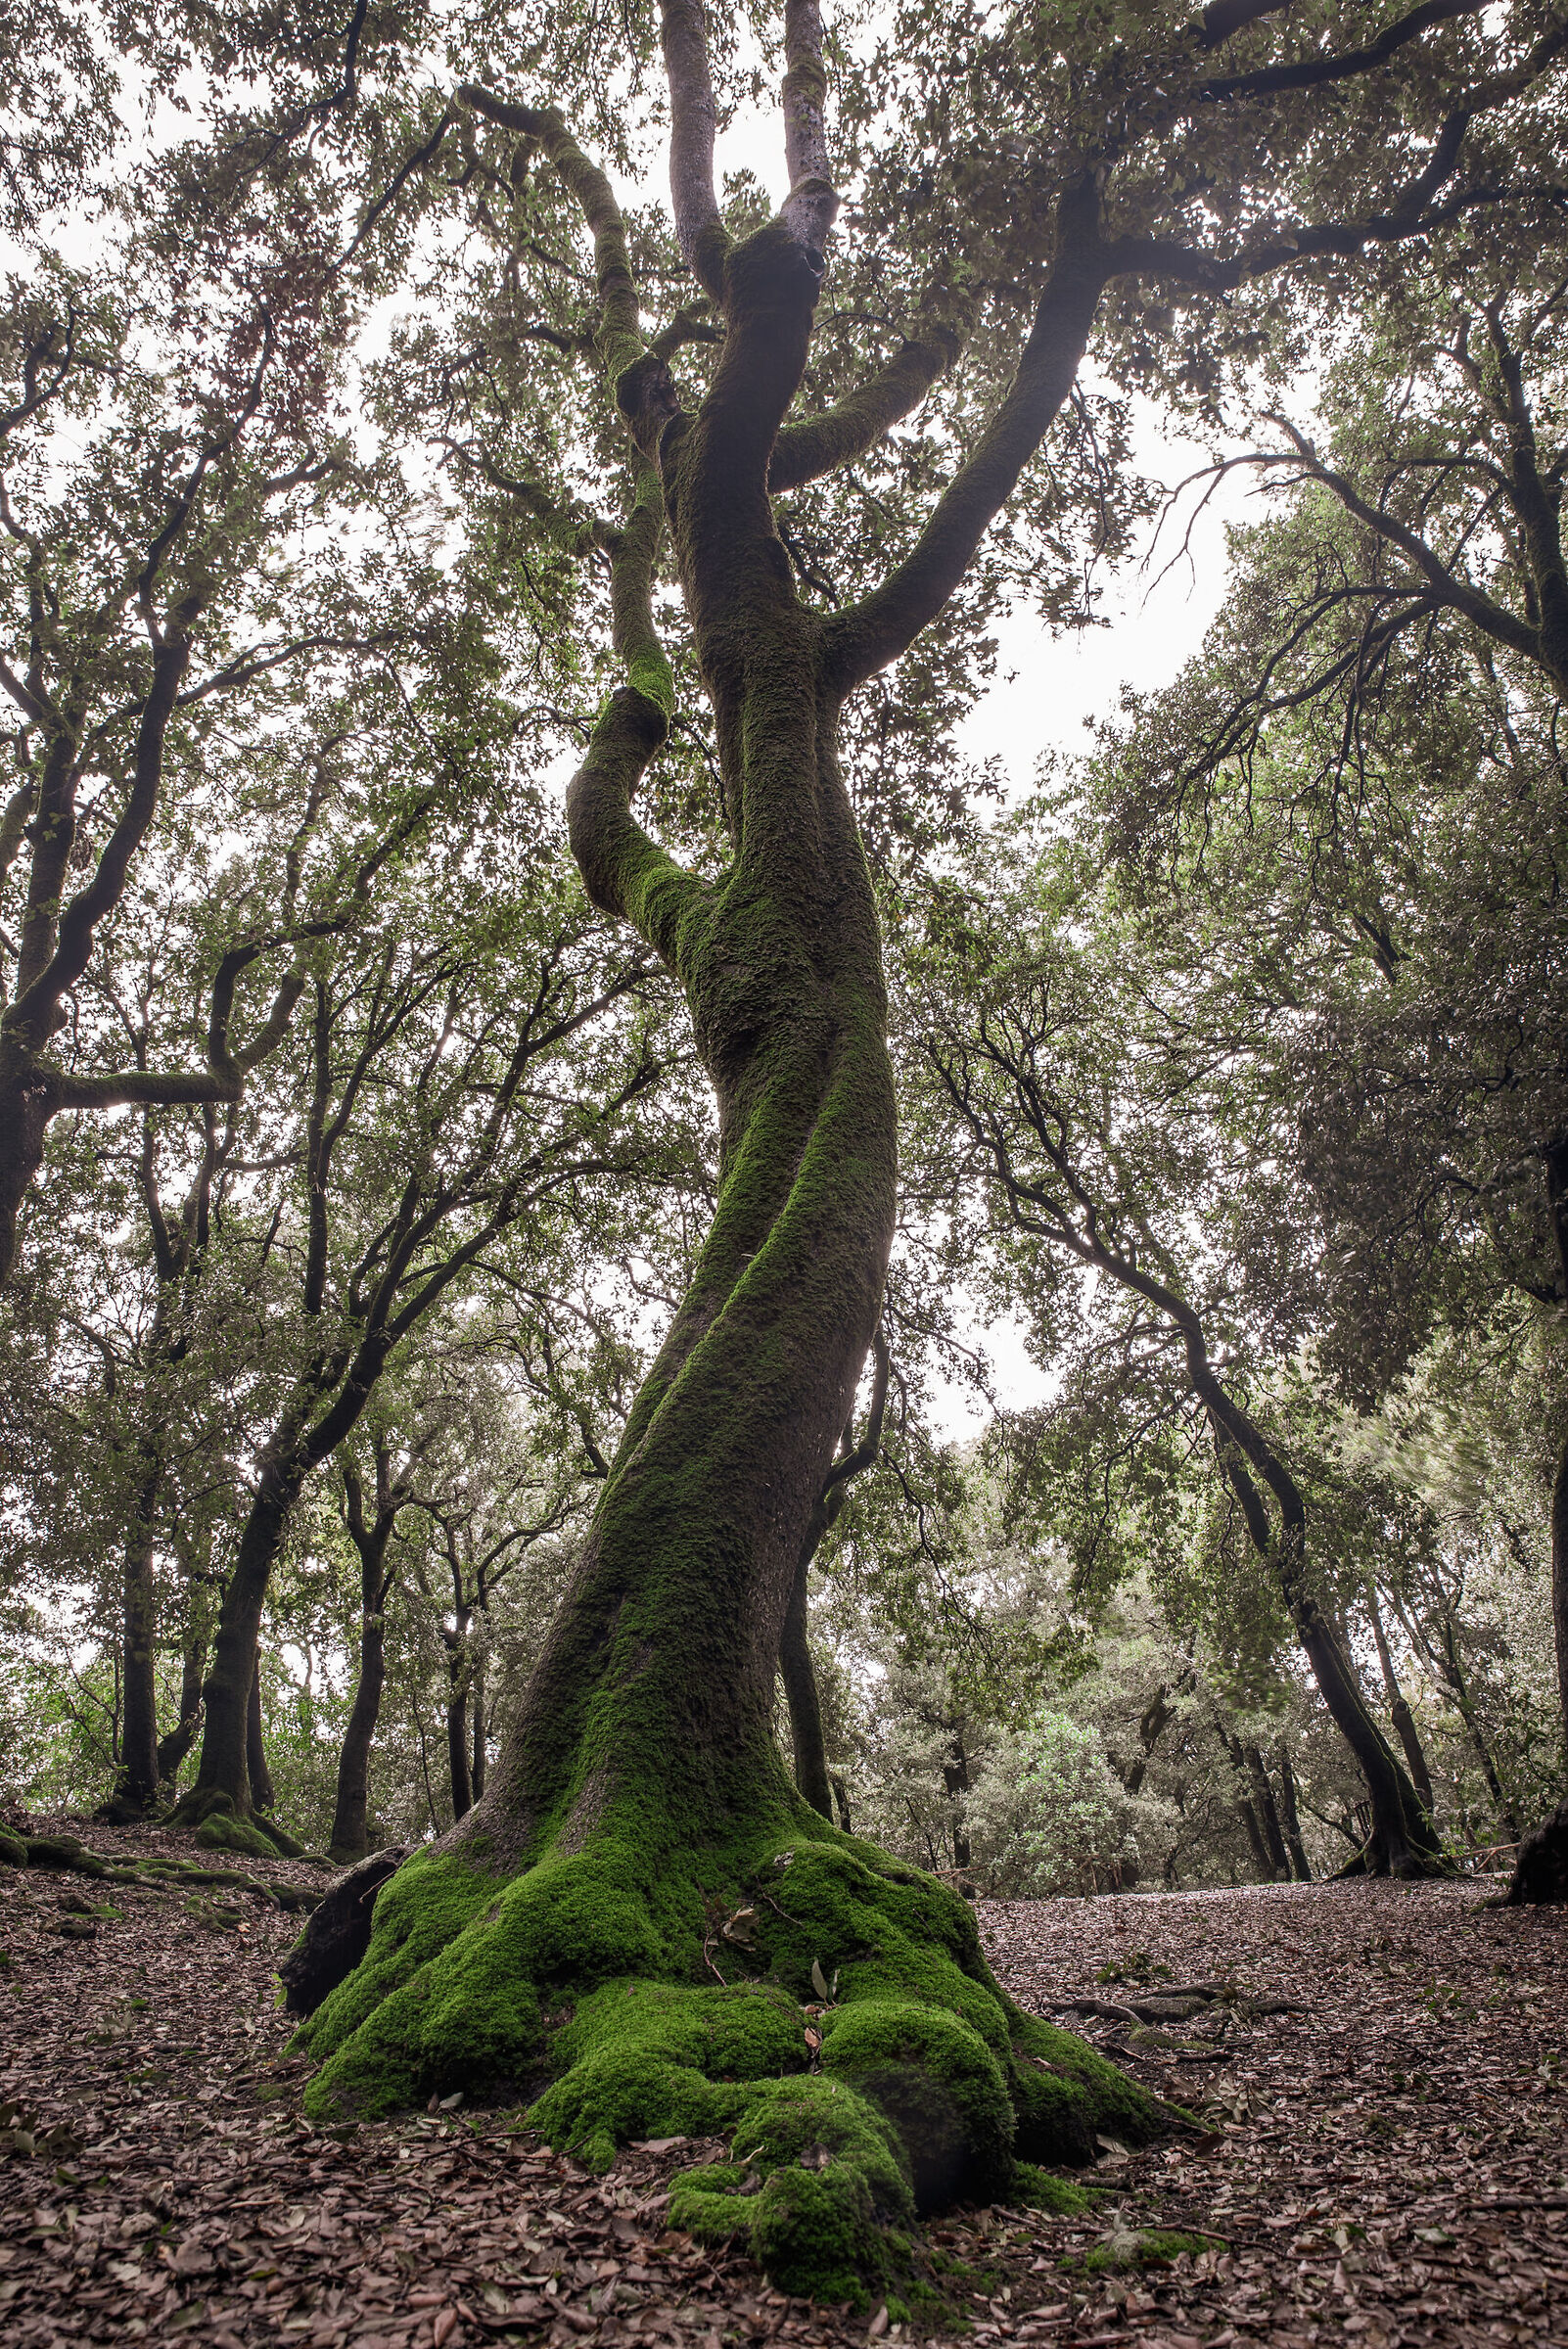 The dance of the Holm oak...